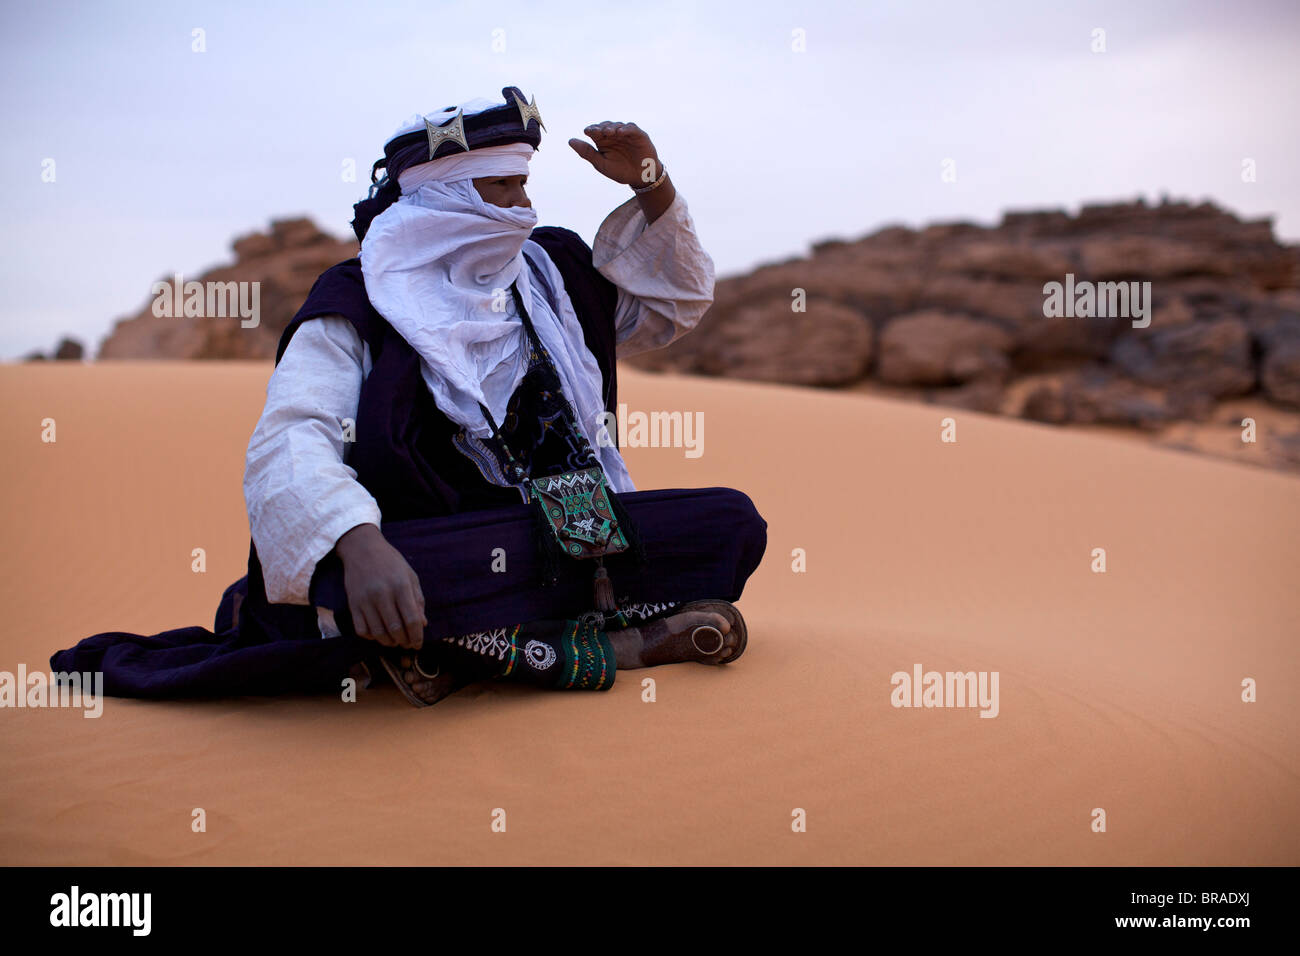 A Tuareg dressed for celebrations at the entrance of the Dar Sahara tented camp in the Fezzan desert, Libya, North Africa Stock Photo